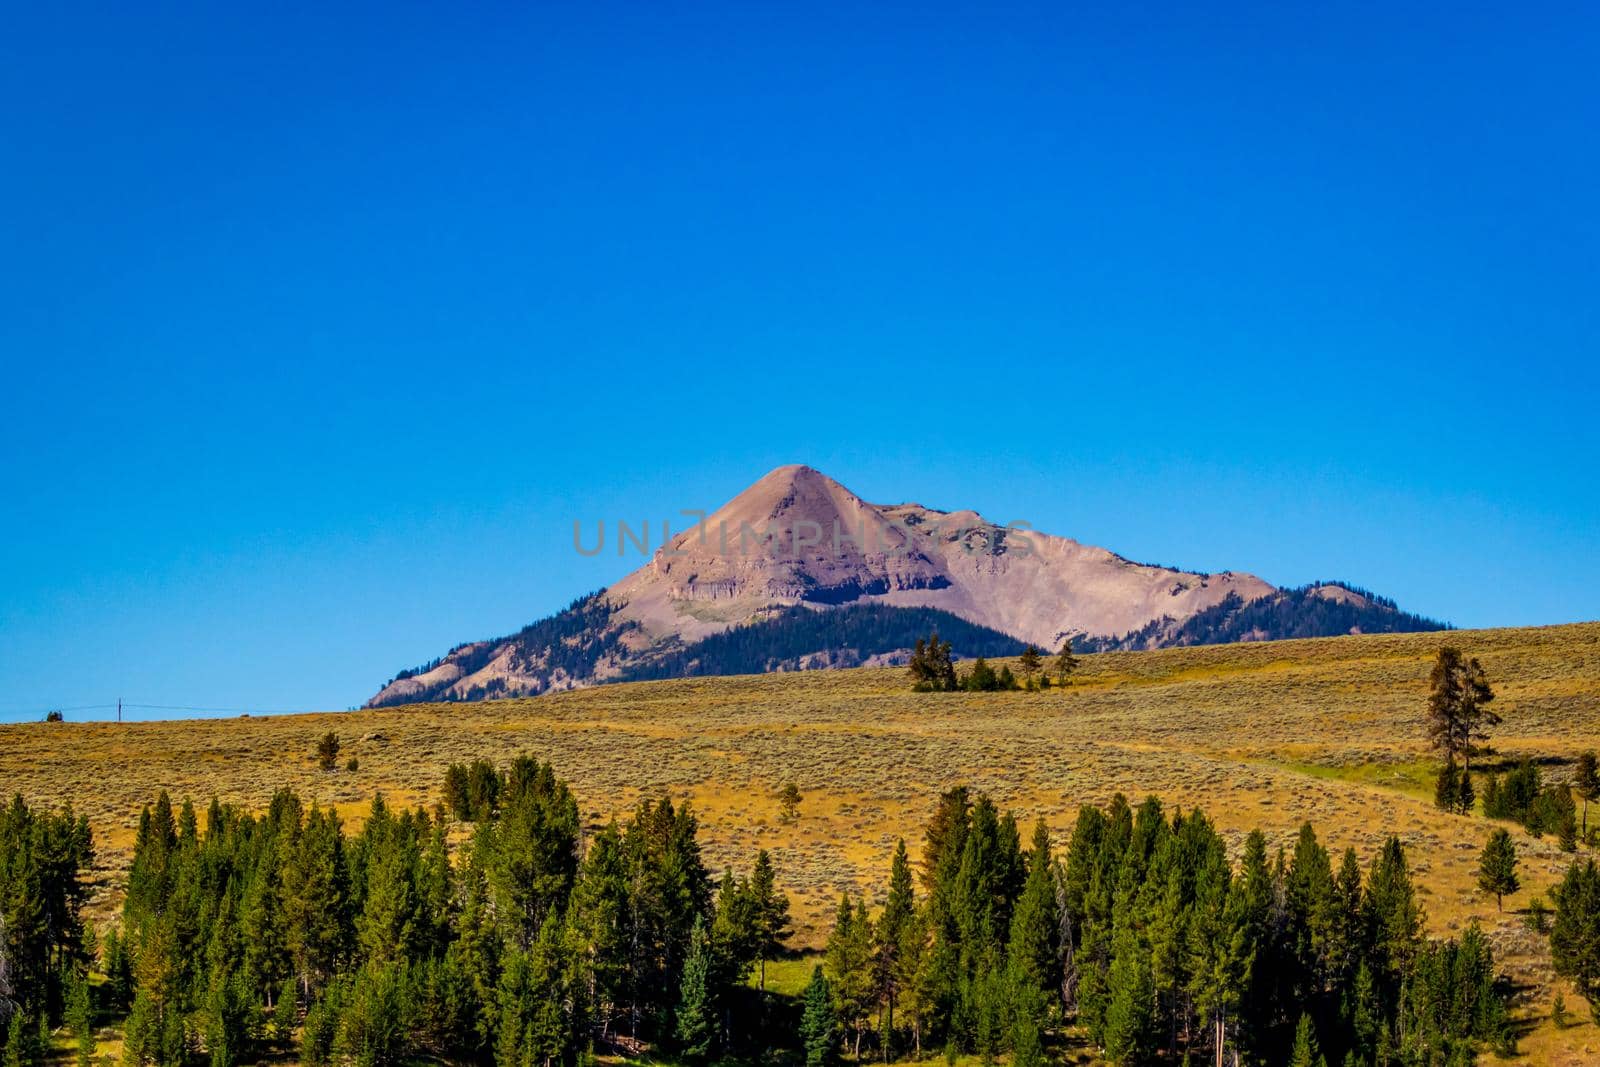 Antler Peak is a prominent mountain peak in the Gallatin Range in Yellowstone National Park